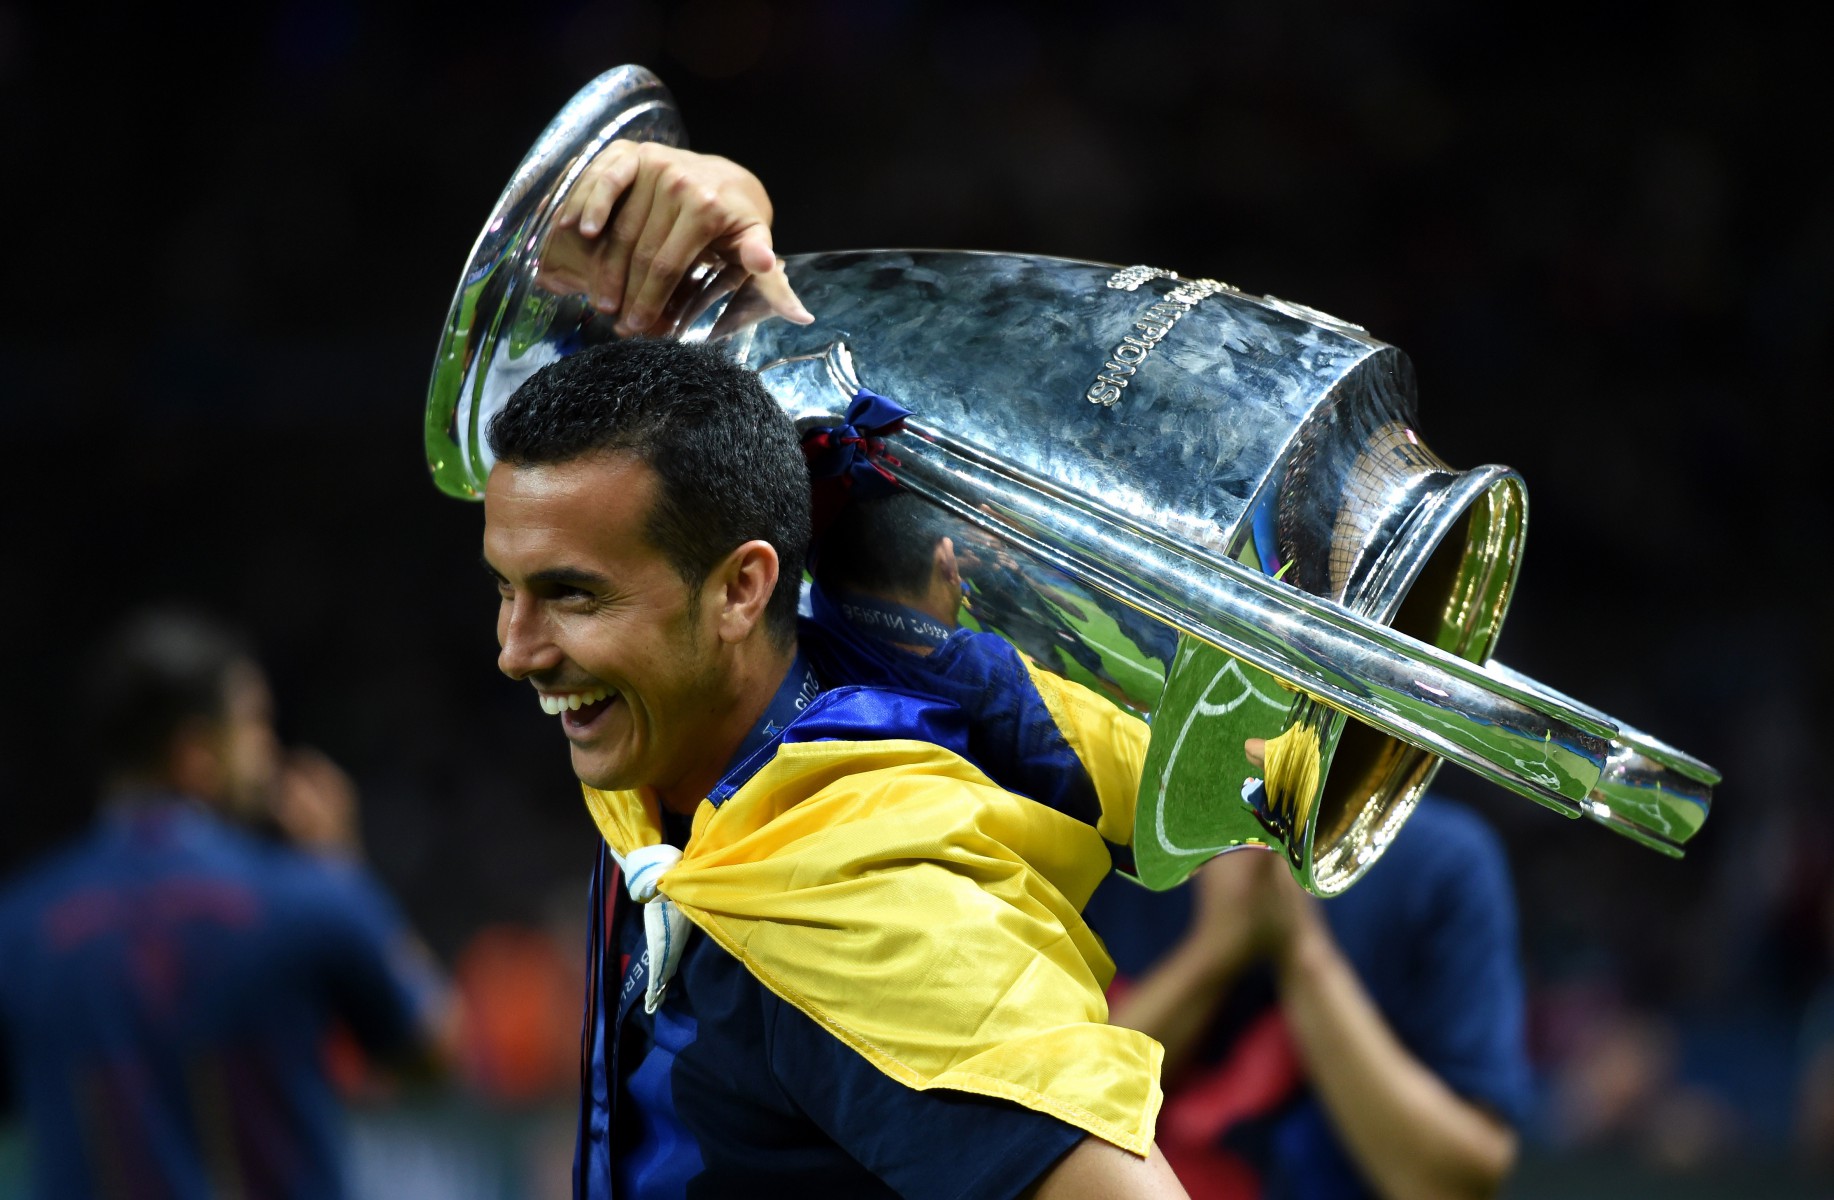 Pedro has won three Champions Leagues, the World Cup and the European Championships among other trophies in a decorated career